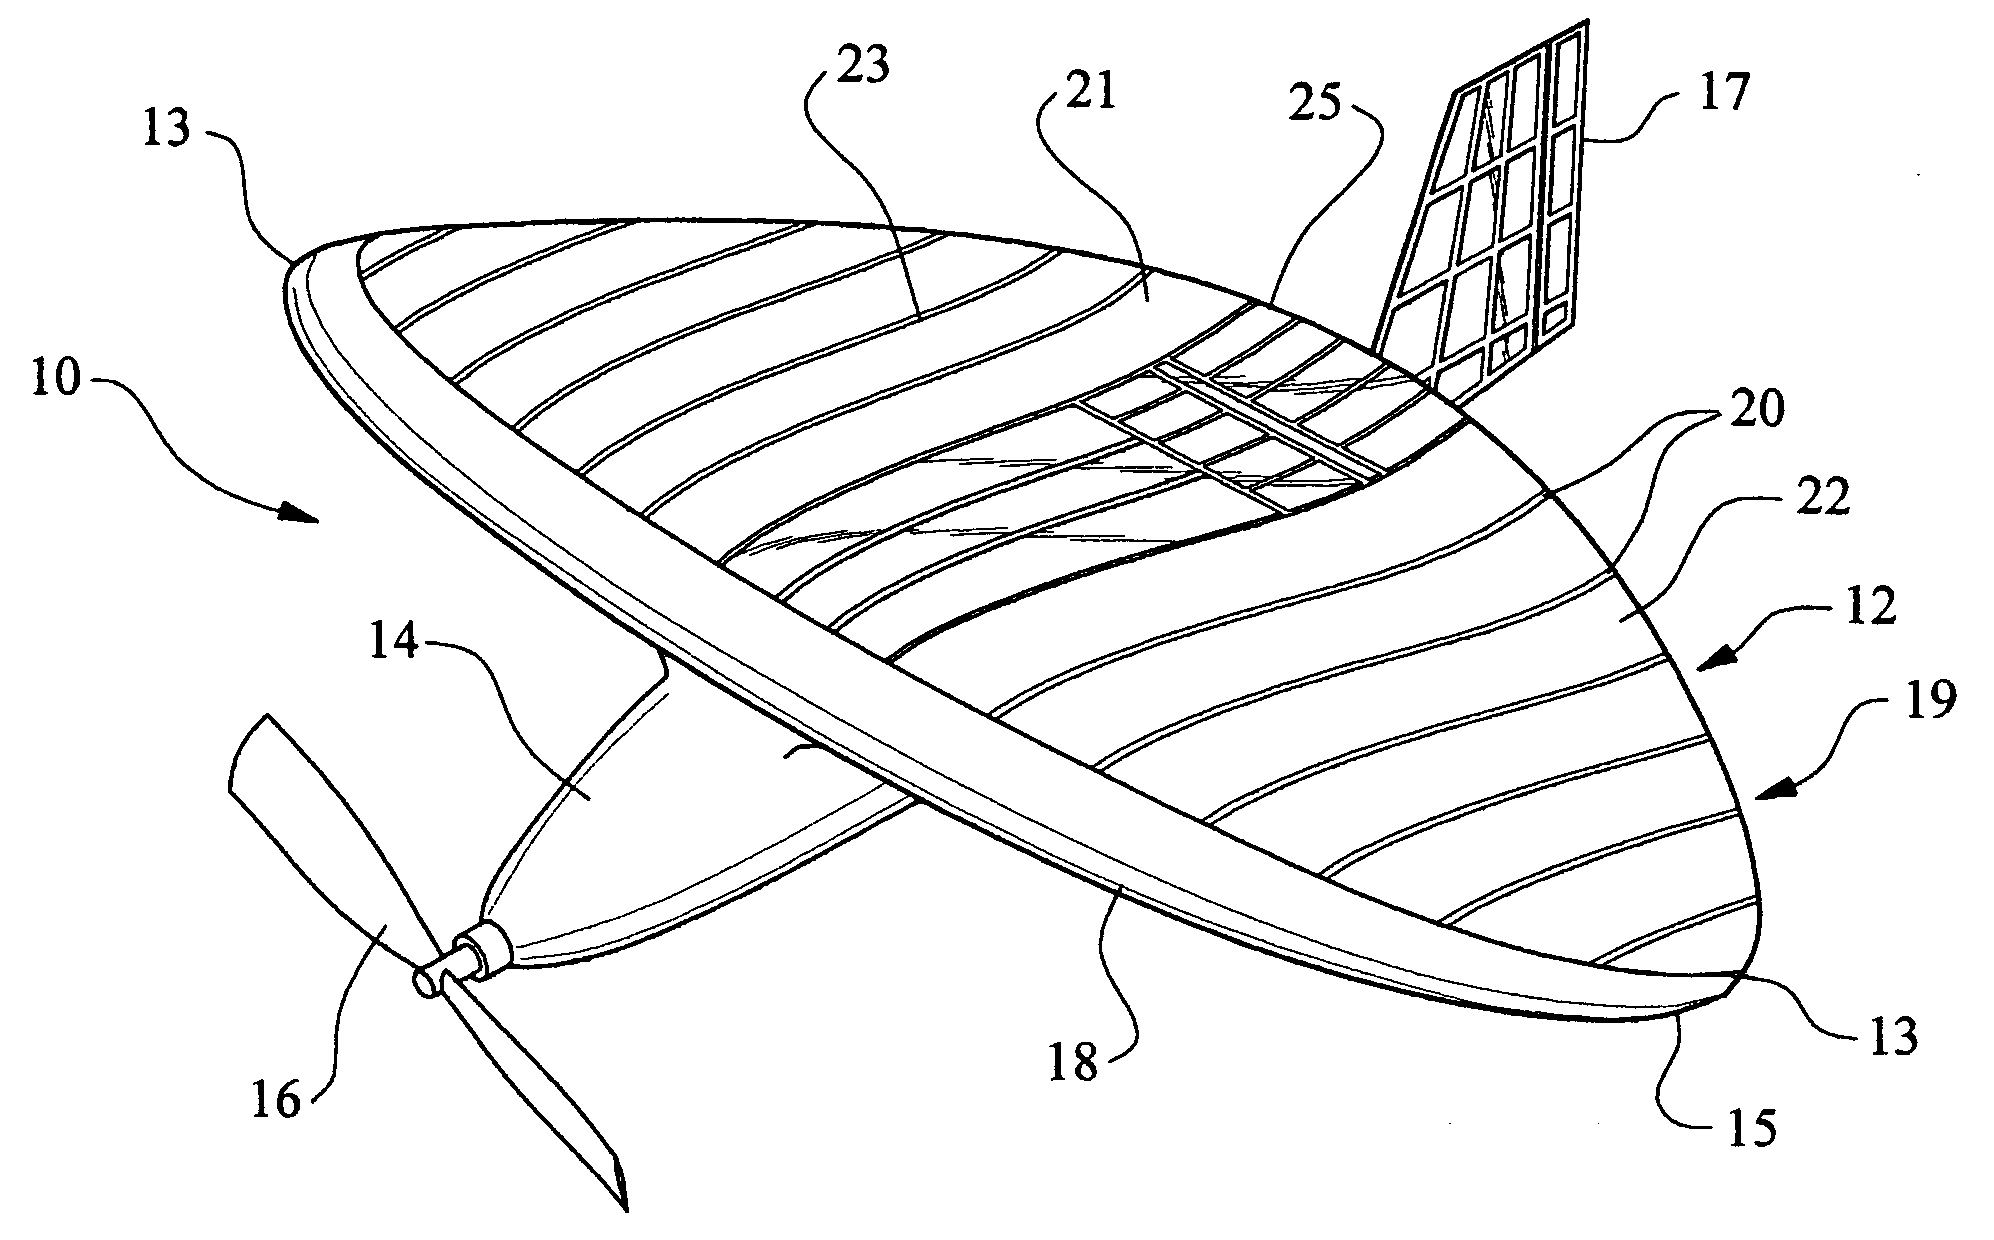 Bendable wing for micro air vehicle